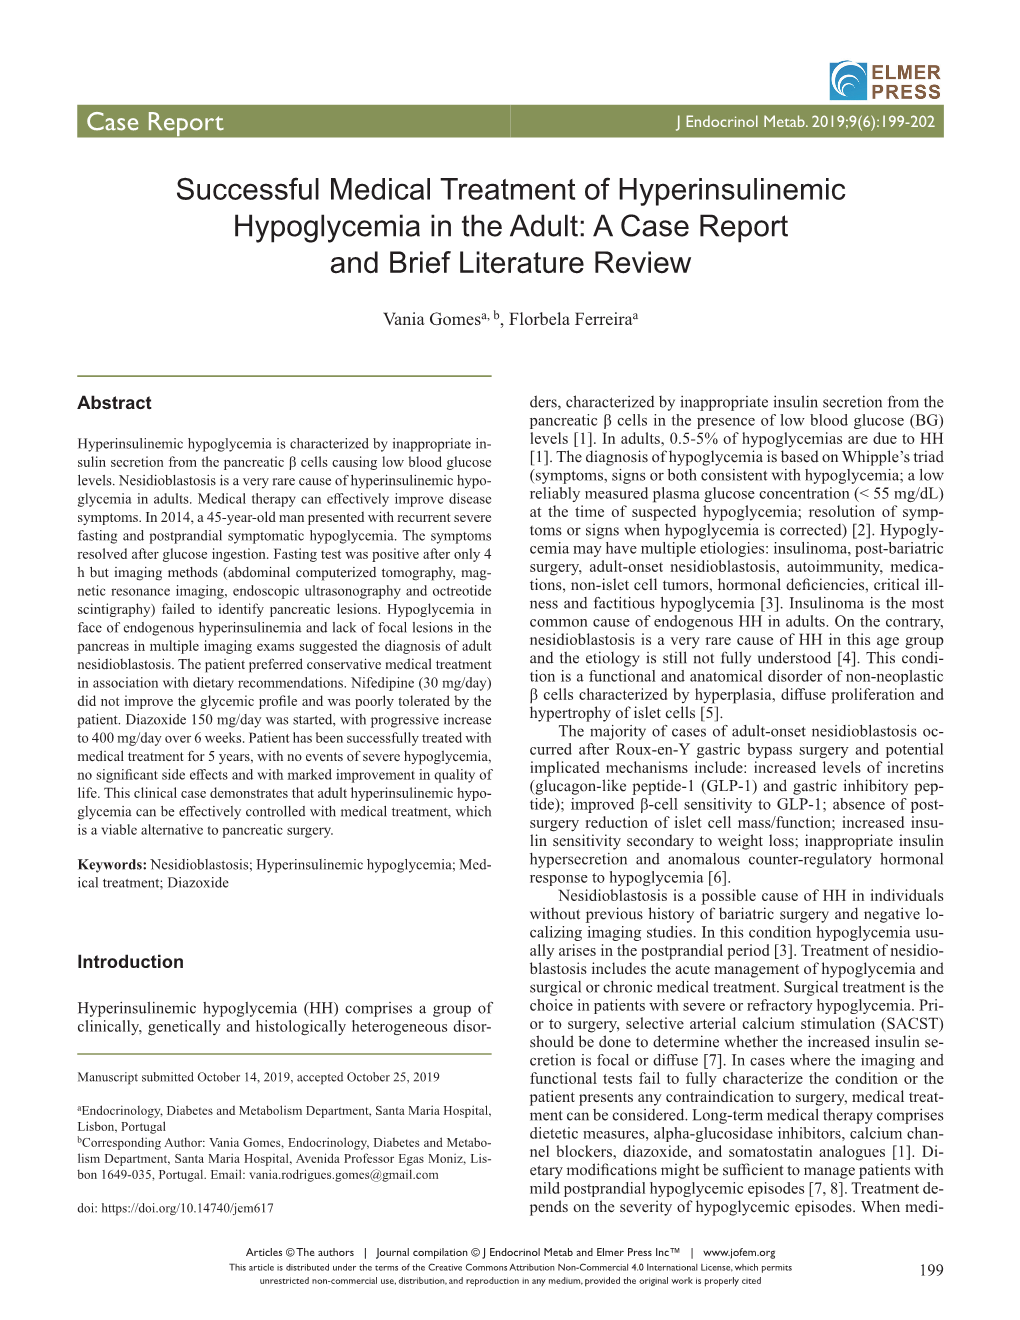 Successful Medical Treatment of Hyperinsulinemic Hypoglycemia in the Adult: a Case Report and Brief Literature Review